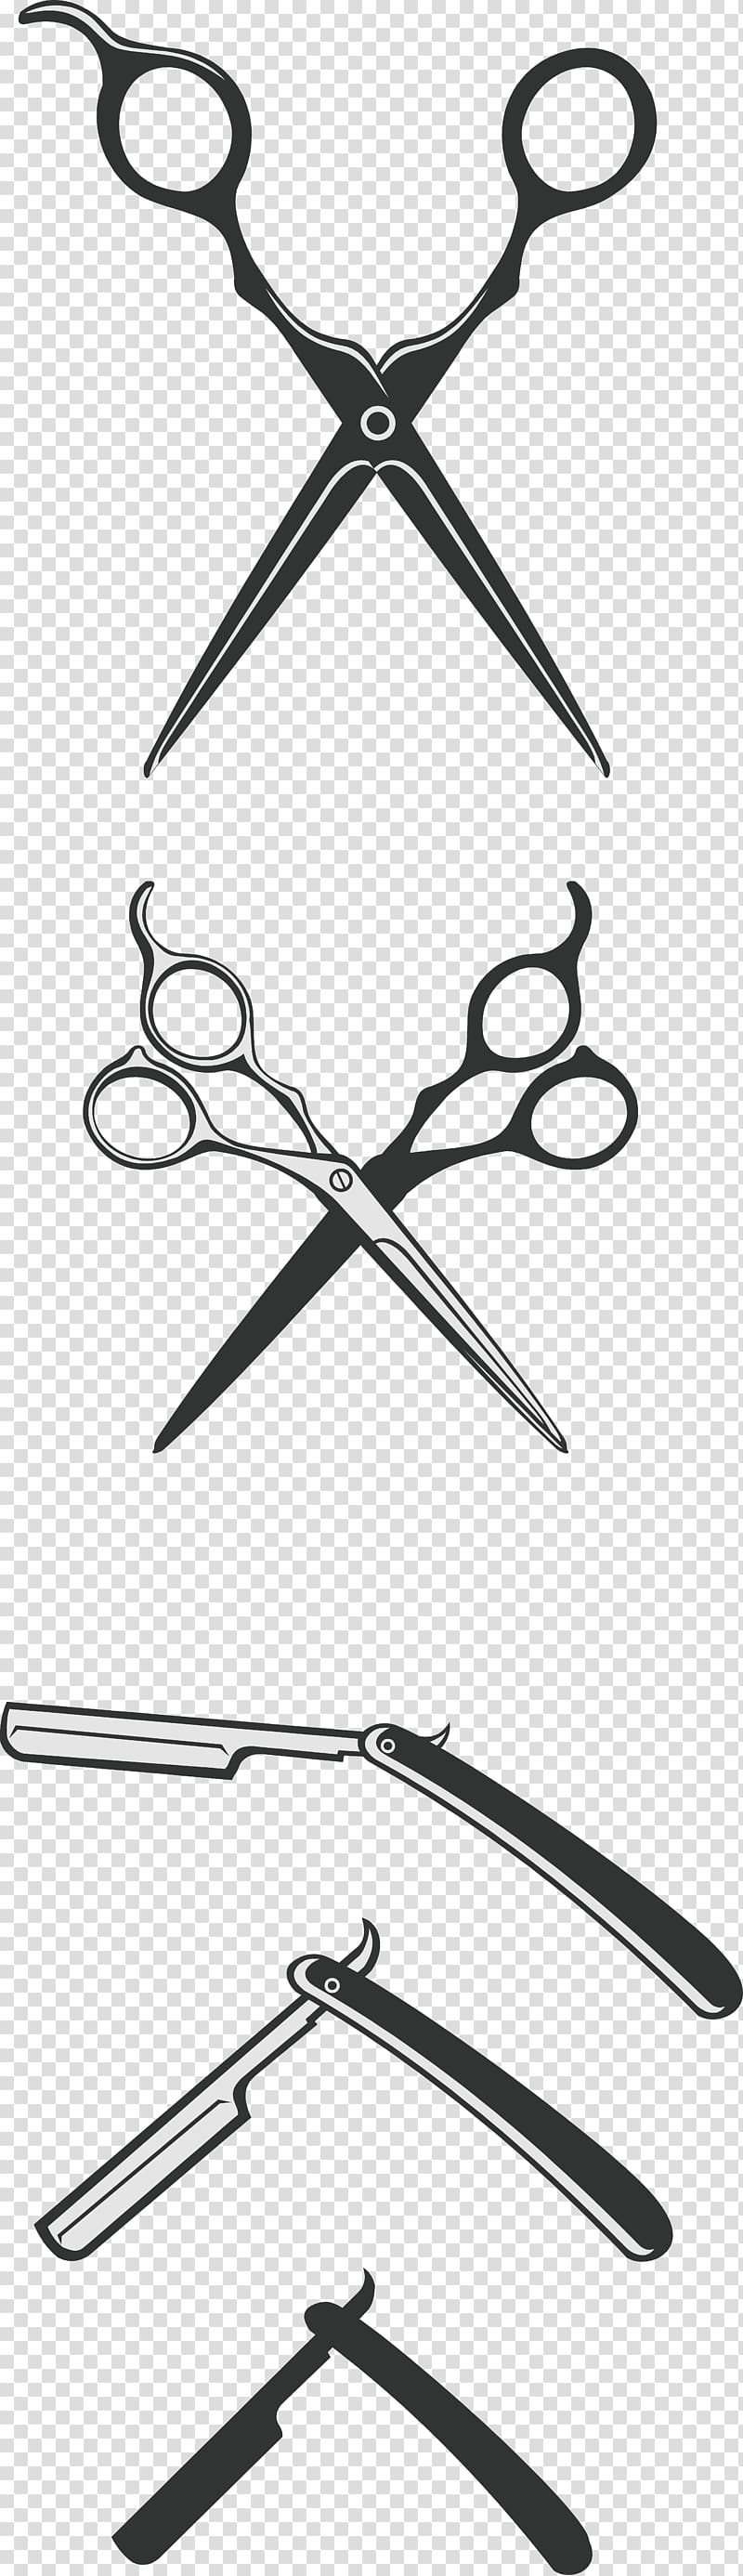 scissors and straight razors illustration, Comb Barber Hair care, Barber tools transparent background PNG clipart